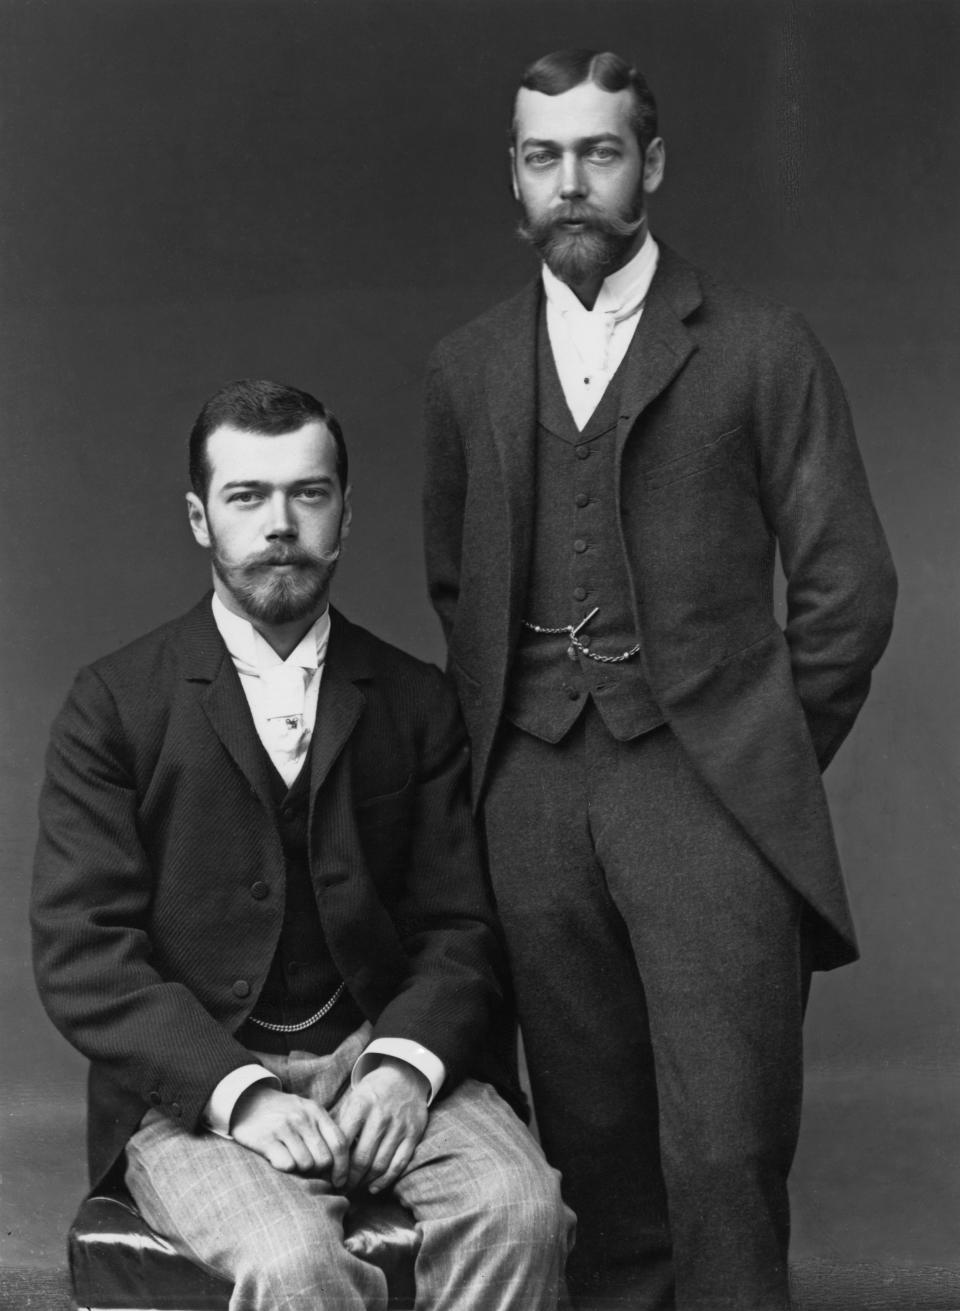 The Tsarevich of Russia (1868 - 1918, later Czar Nicholas II of Russia, left), with his cousin, Prince George, Duke of York (1865 - 1936, later King George V), UK, 1893. Nicholas is in Britain for George's wedding to Princess Mary of Teck. (Photo by Hulton Archive/Getty Images)